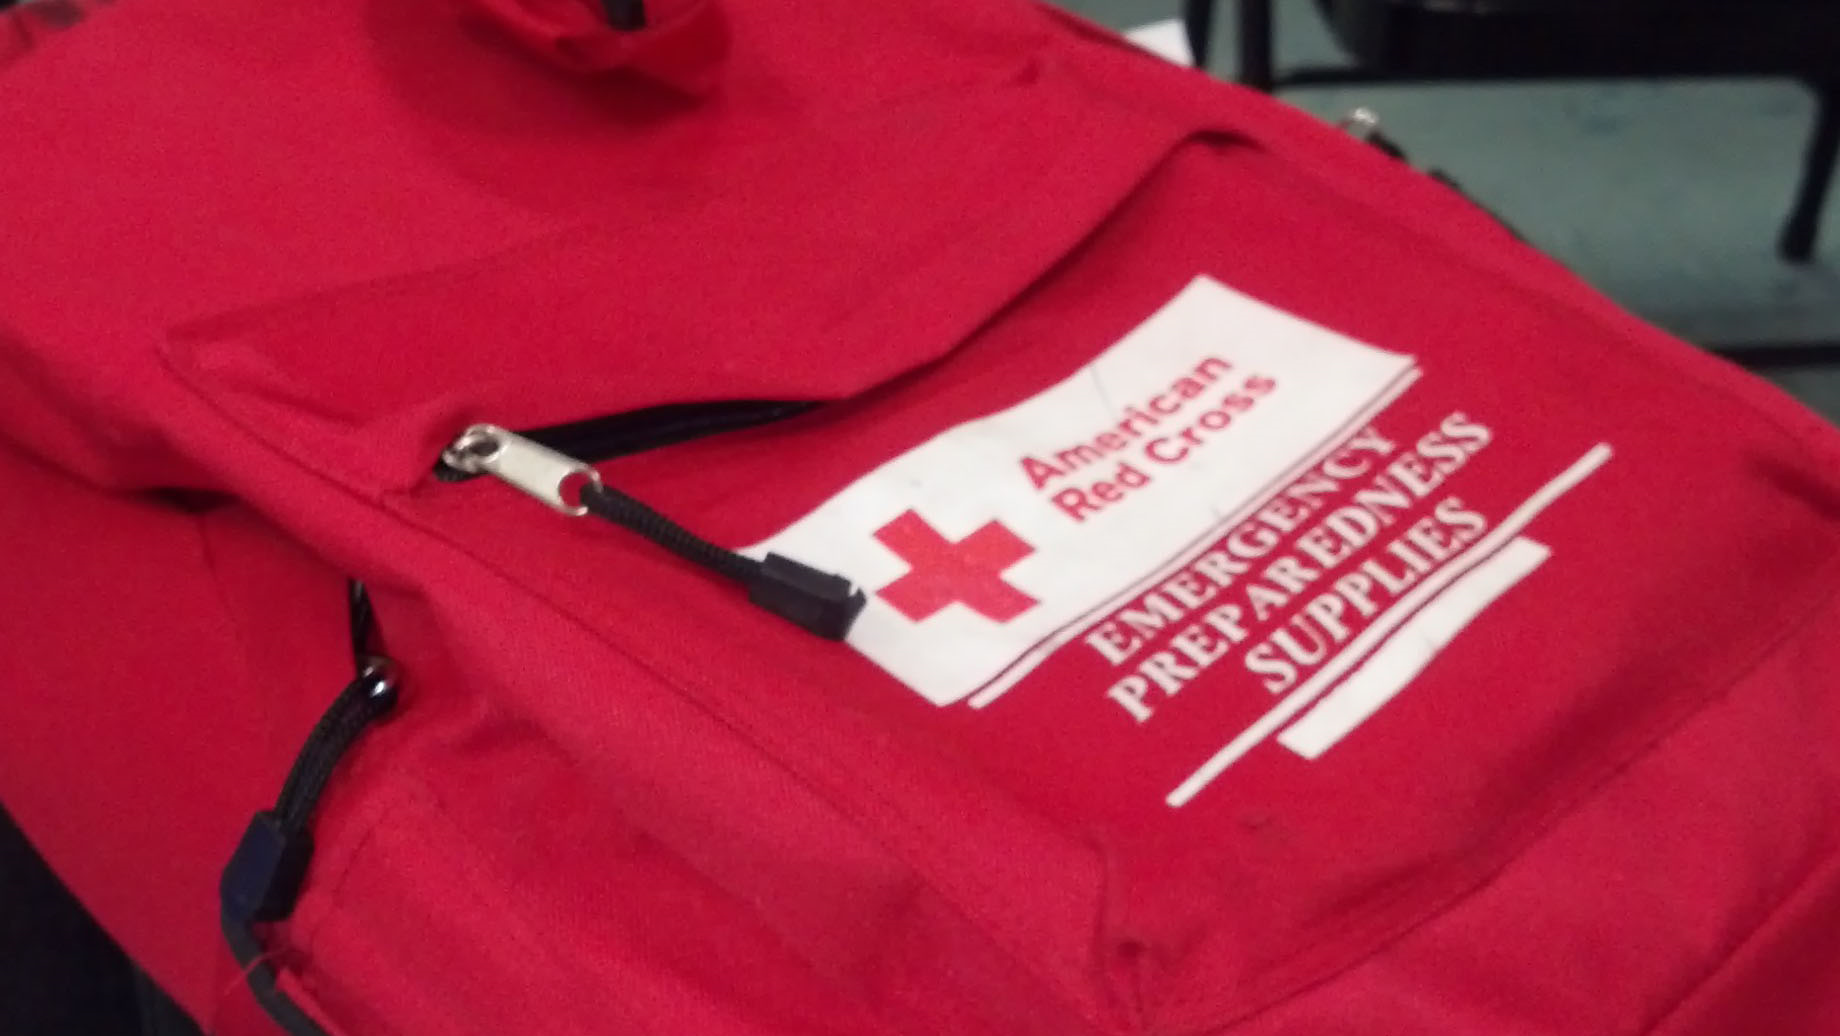 Already Dealing With Harvey, Red Cross Teams Deployed To Help With Irma's Aftermath